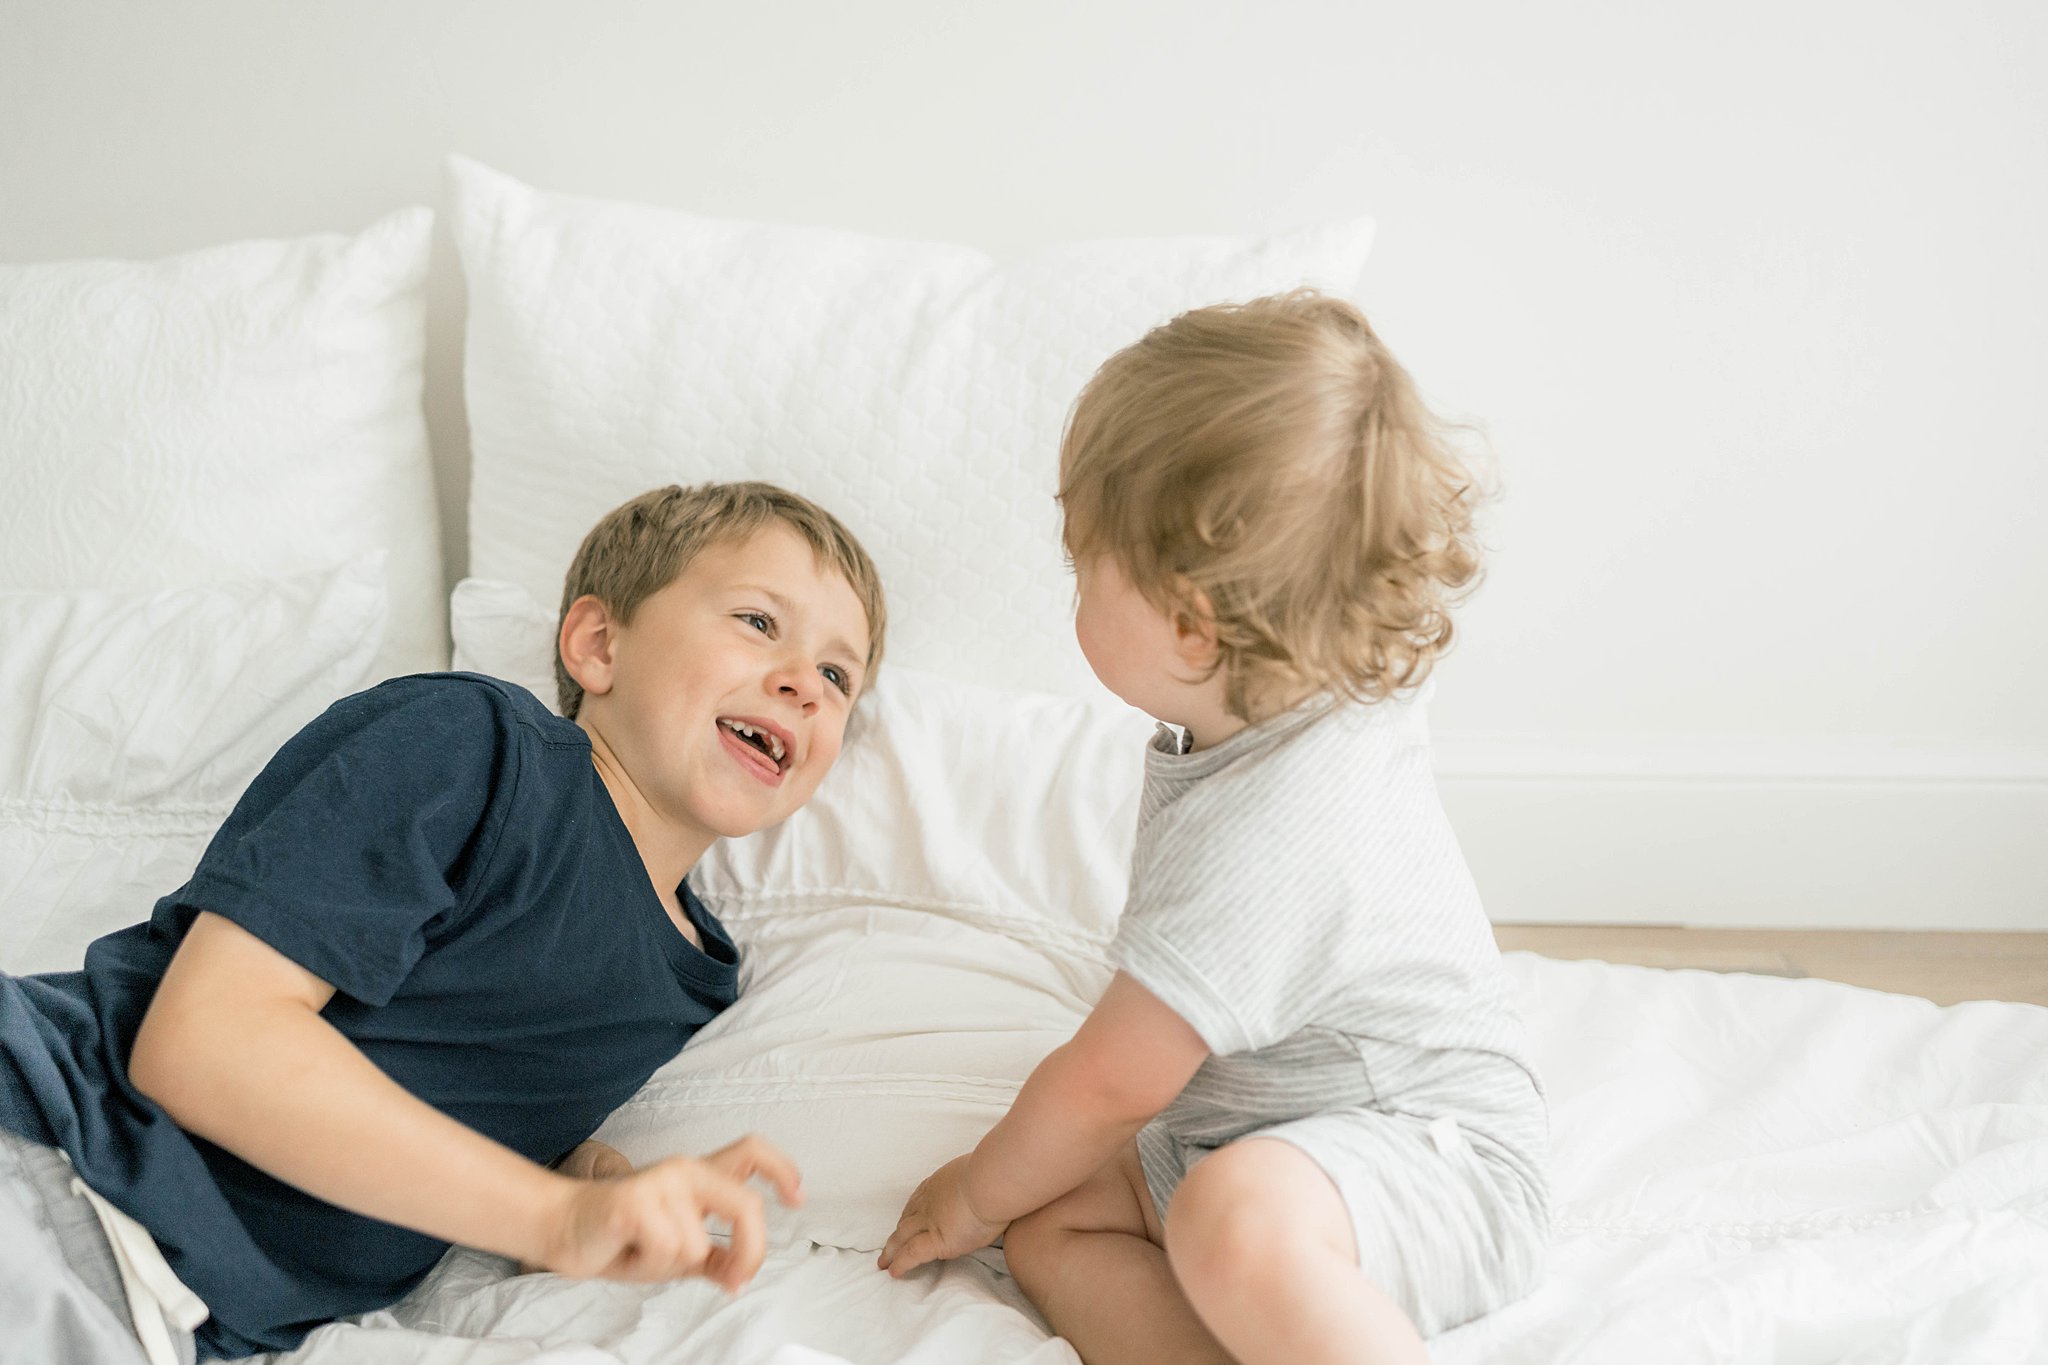 Two young boys play together on a white bed in a studio unpluggits okc